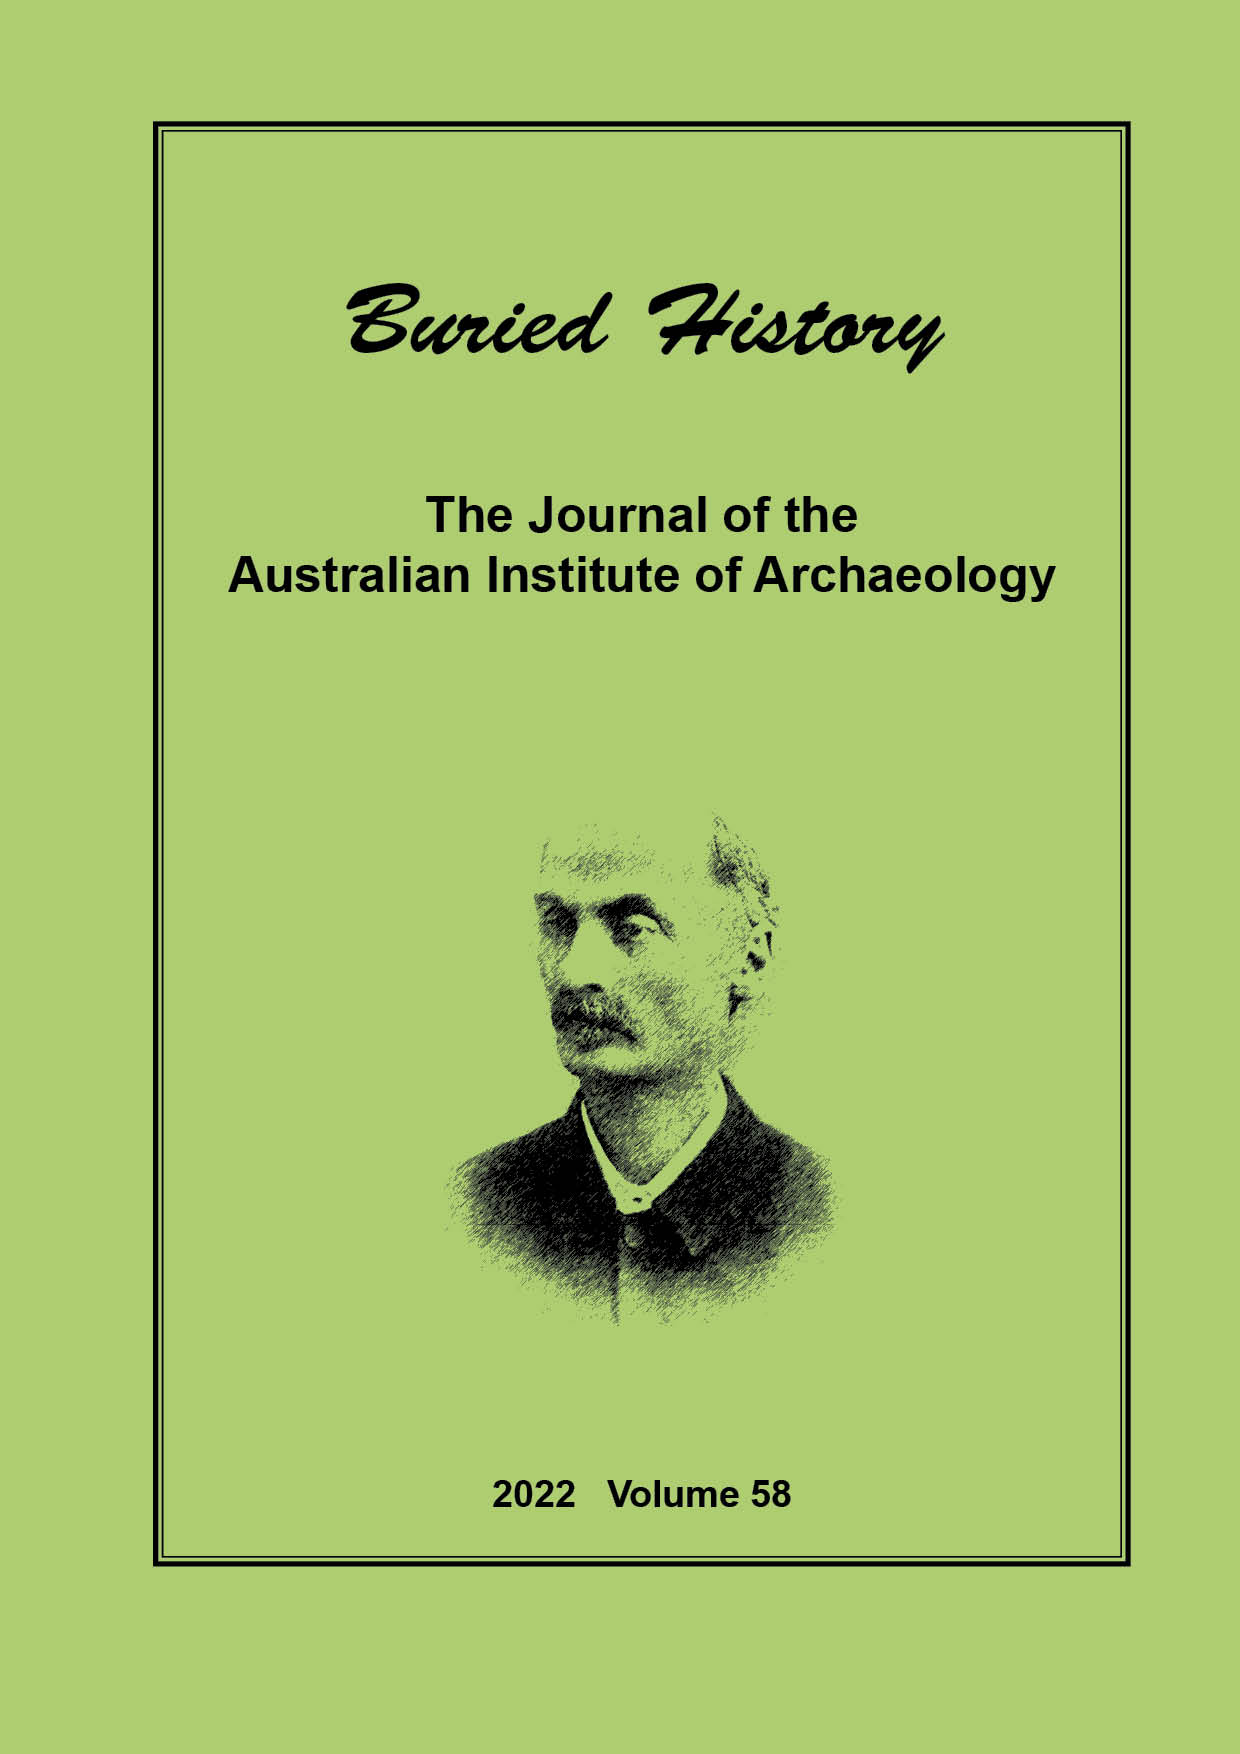 Cover image of Buried History vol. 58 (2022), depicting unnamed older man with moustache